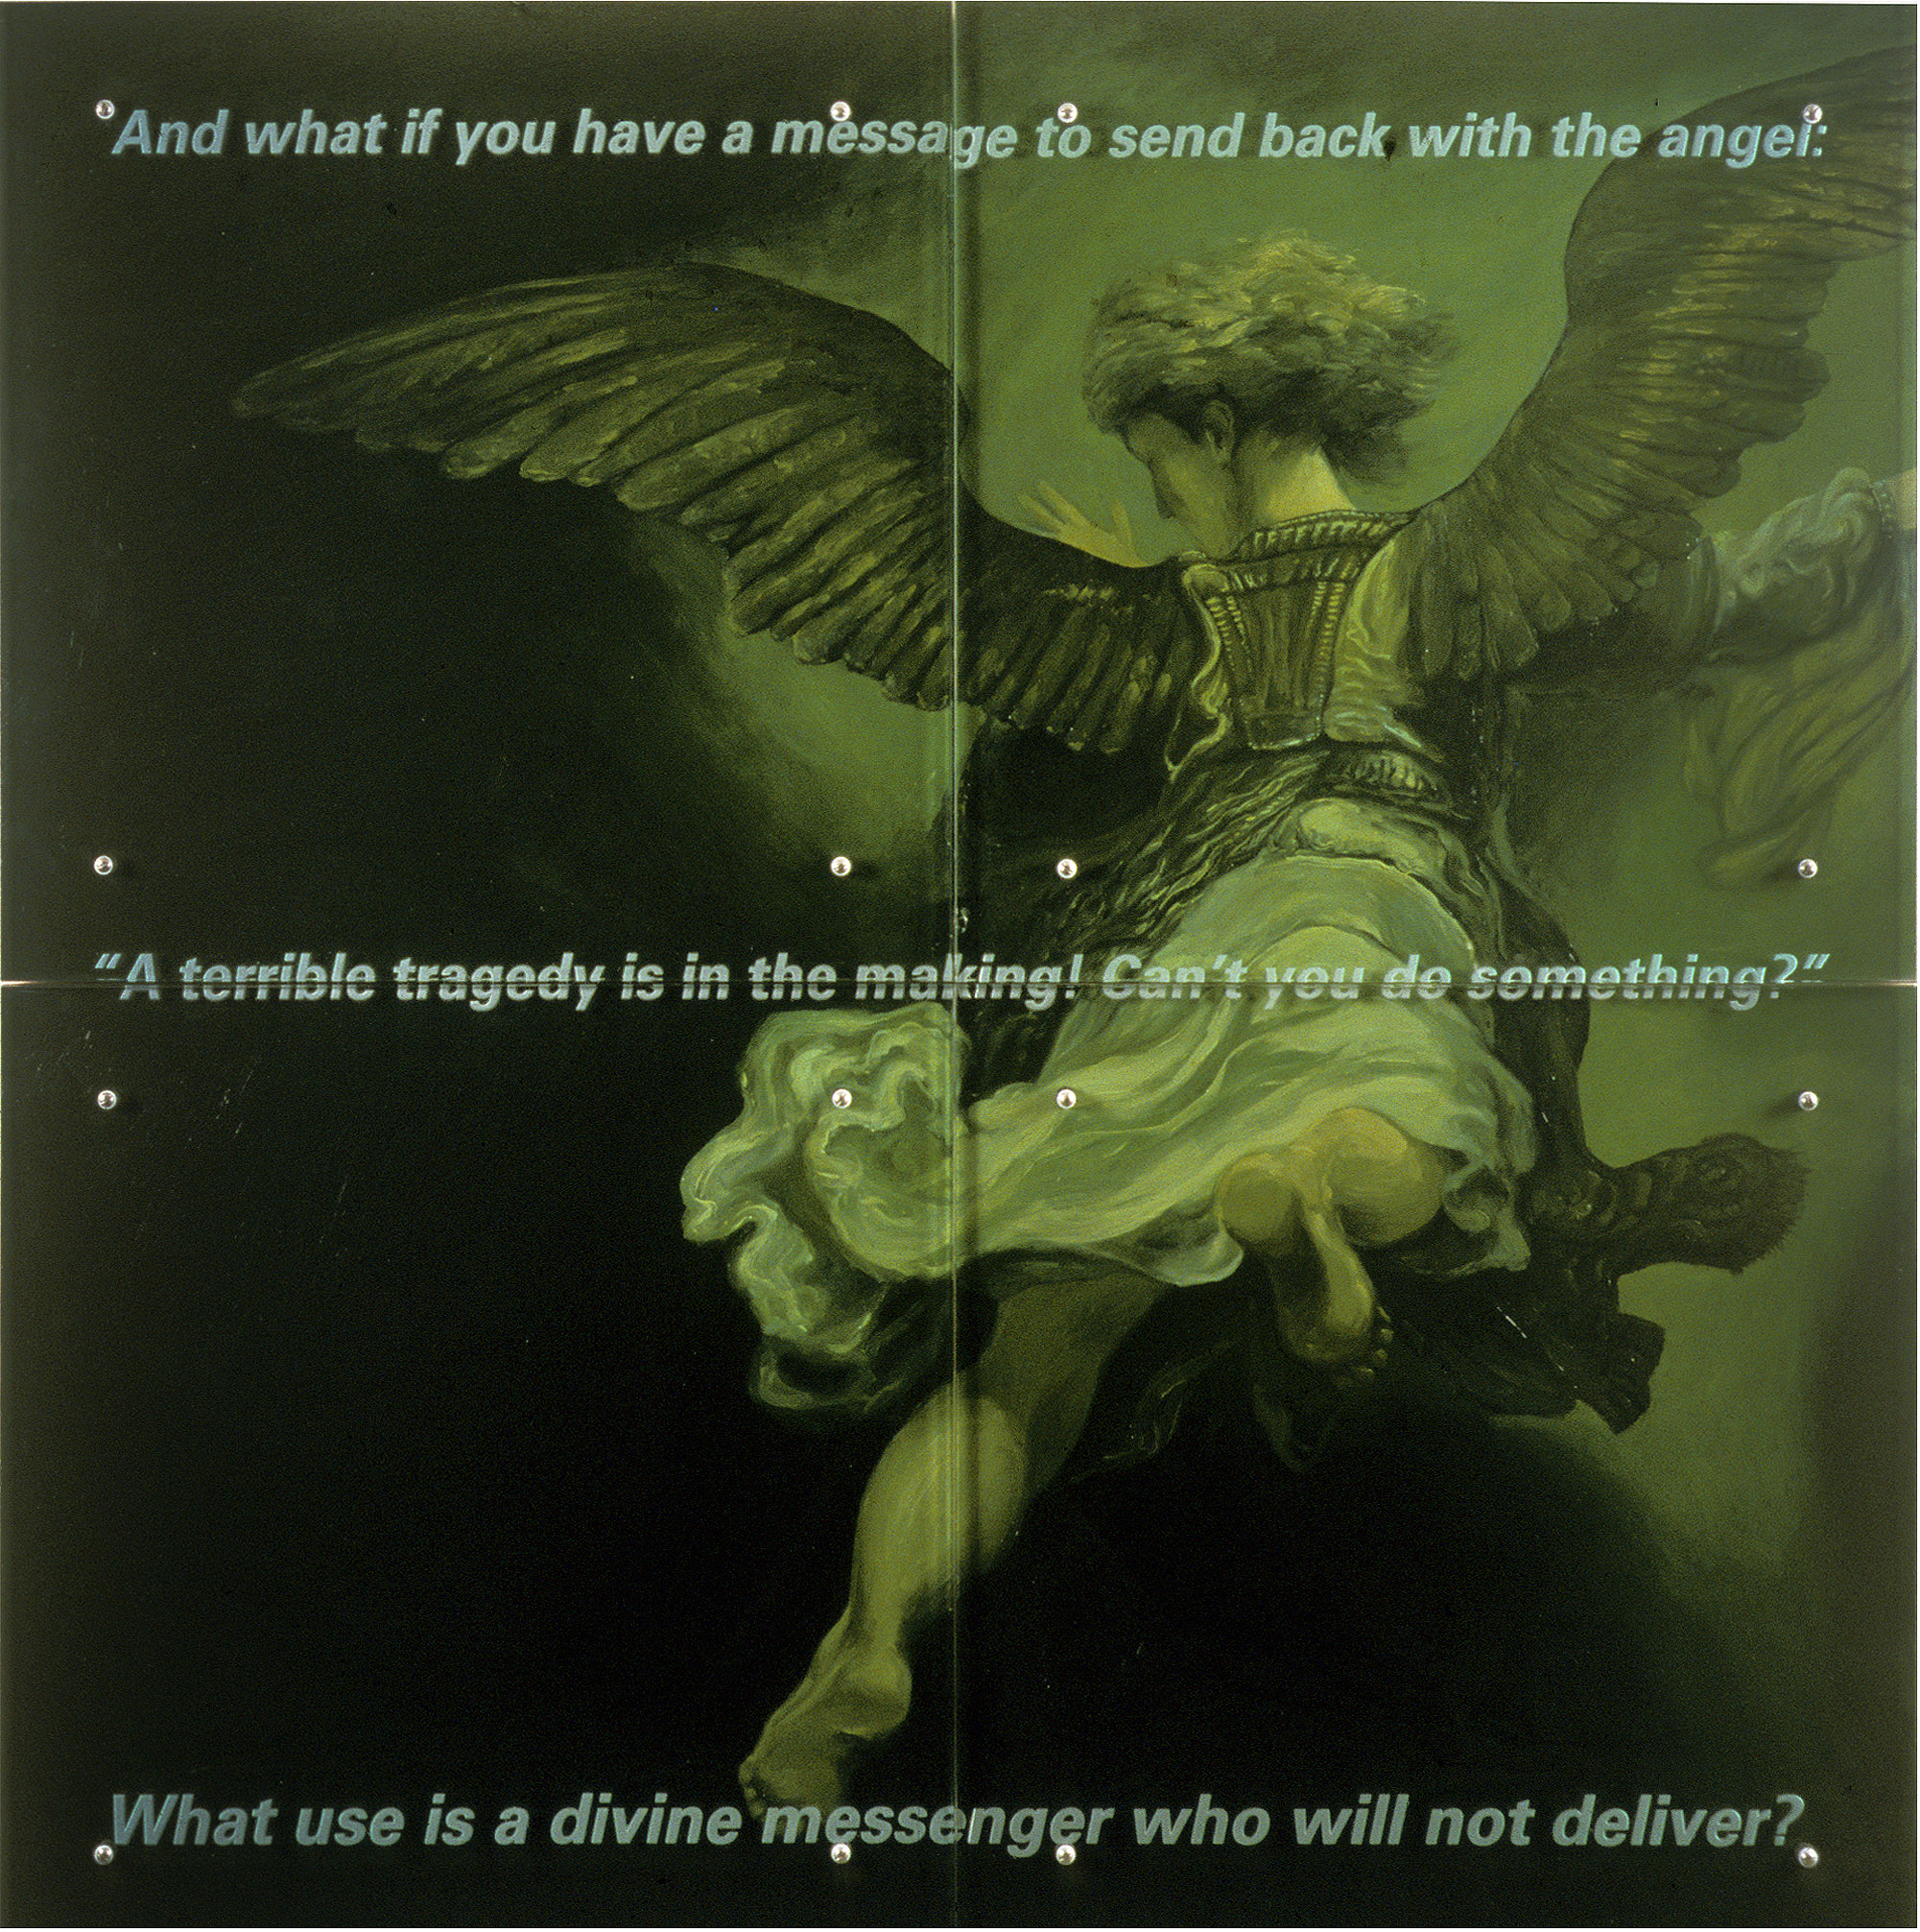 And what if you have a message, 60" x 60" (153cm x 153cm) four panels, oil/wood, sandblasted glass, bolts TEXT IN GLASS: And what if you have a message to send back with the angel: "A terrible tragedy is in the making! Can't you do something?" What use is a divine messenger who will not deliver? After Rembrandt van Rijn, The angel leaving Tobias and his family, 1637, Louvre, Paris